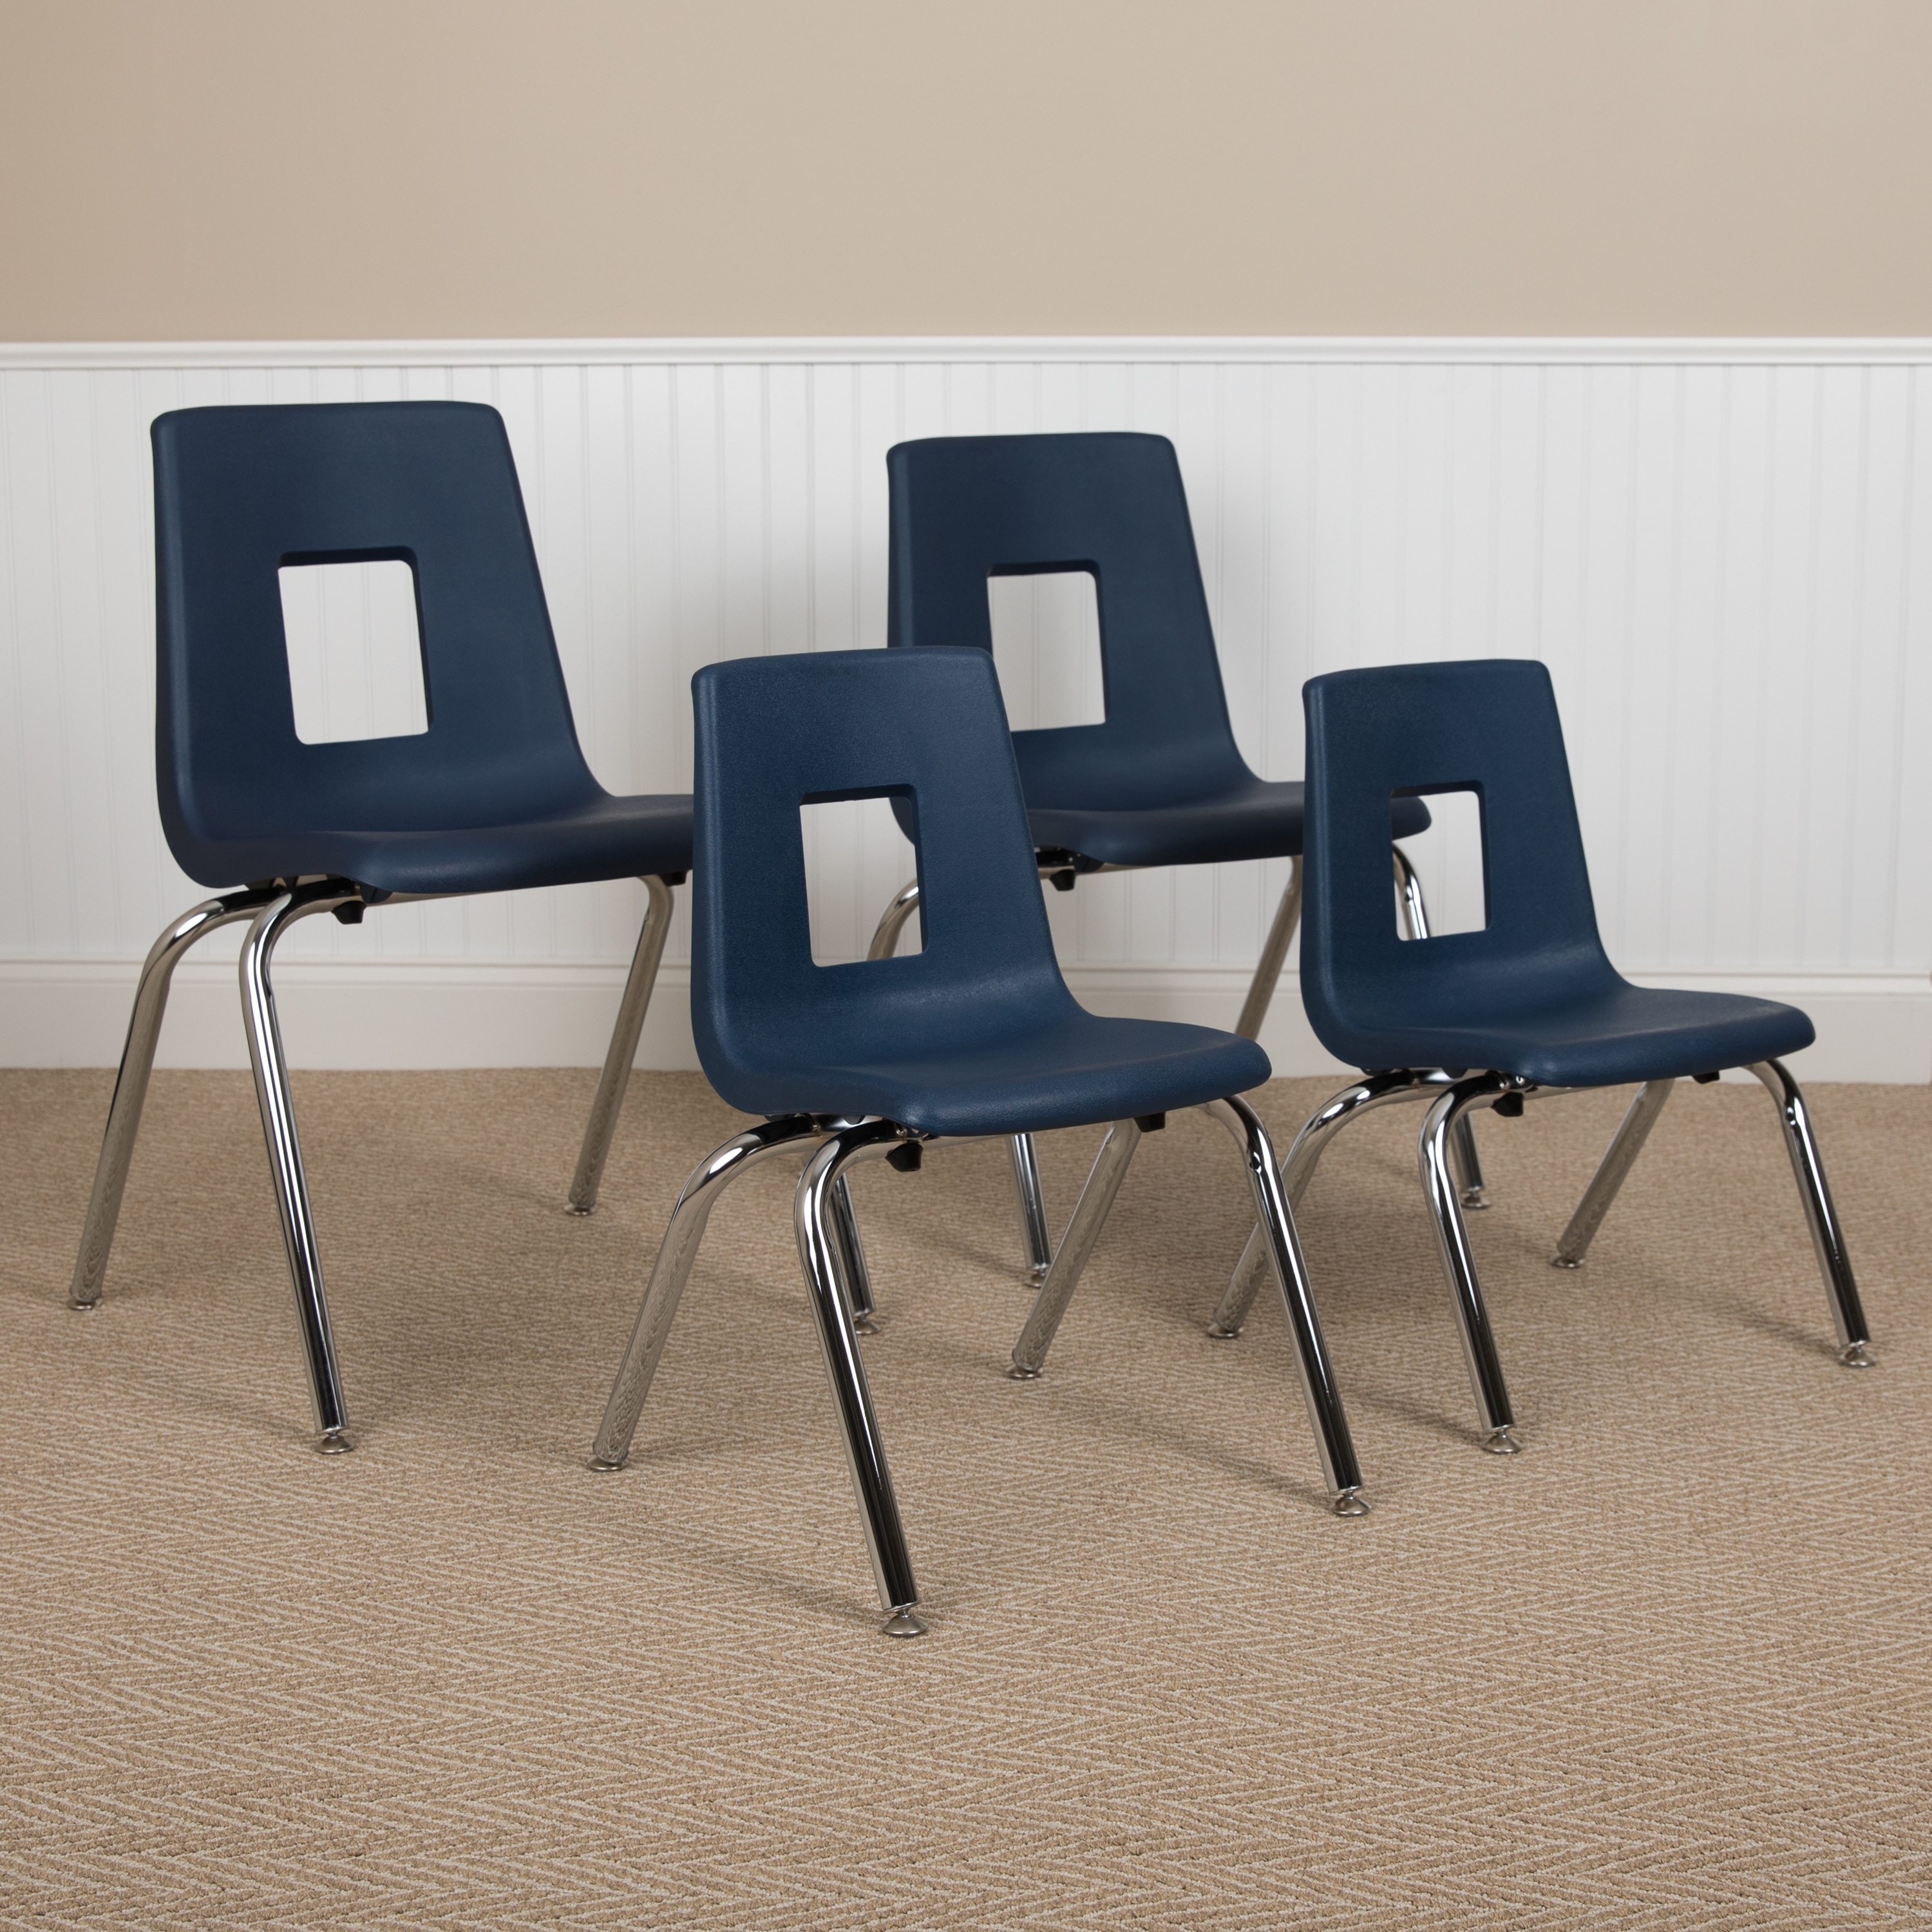 Red 6-Pack 16 School Stack Chair, Stacking Student Chairs with Chromed Steel Legs and Ball Glides 